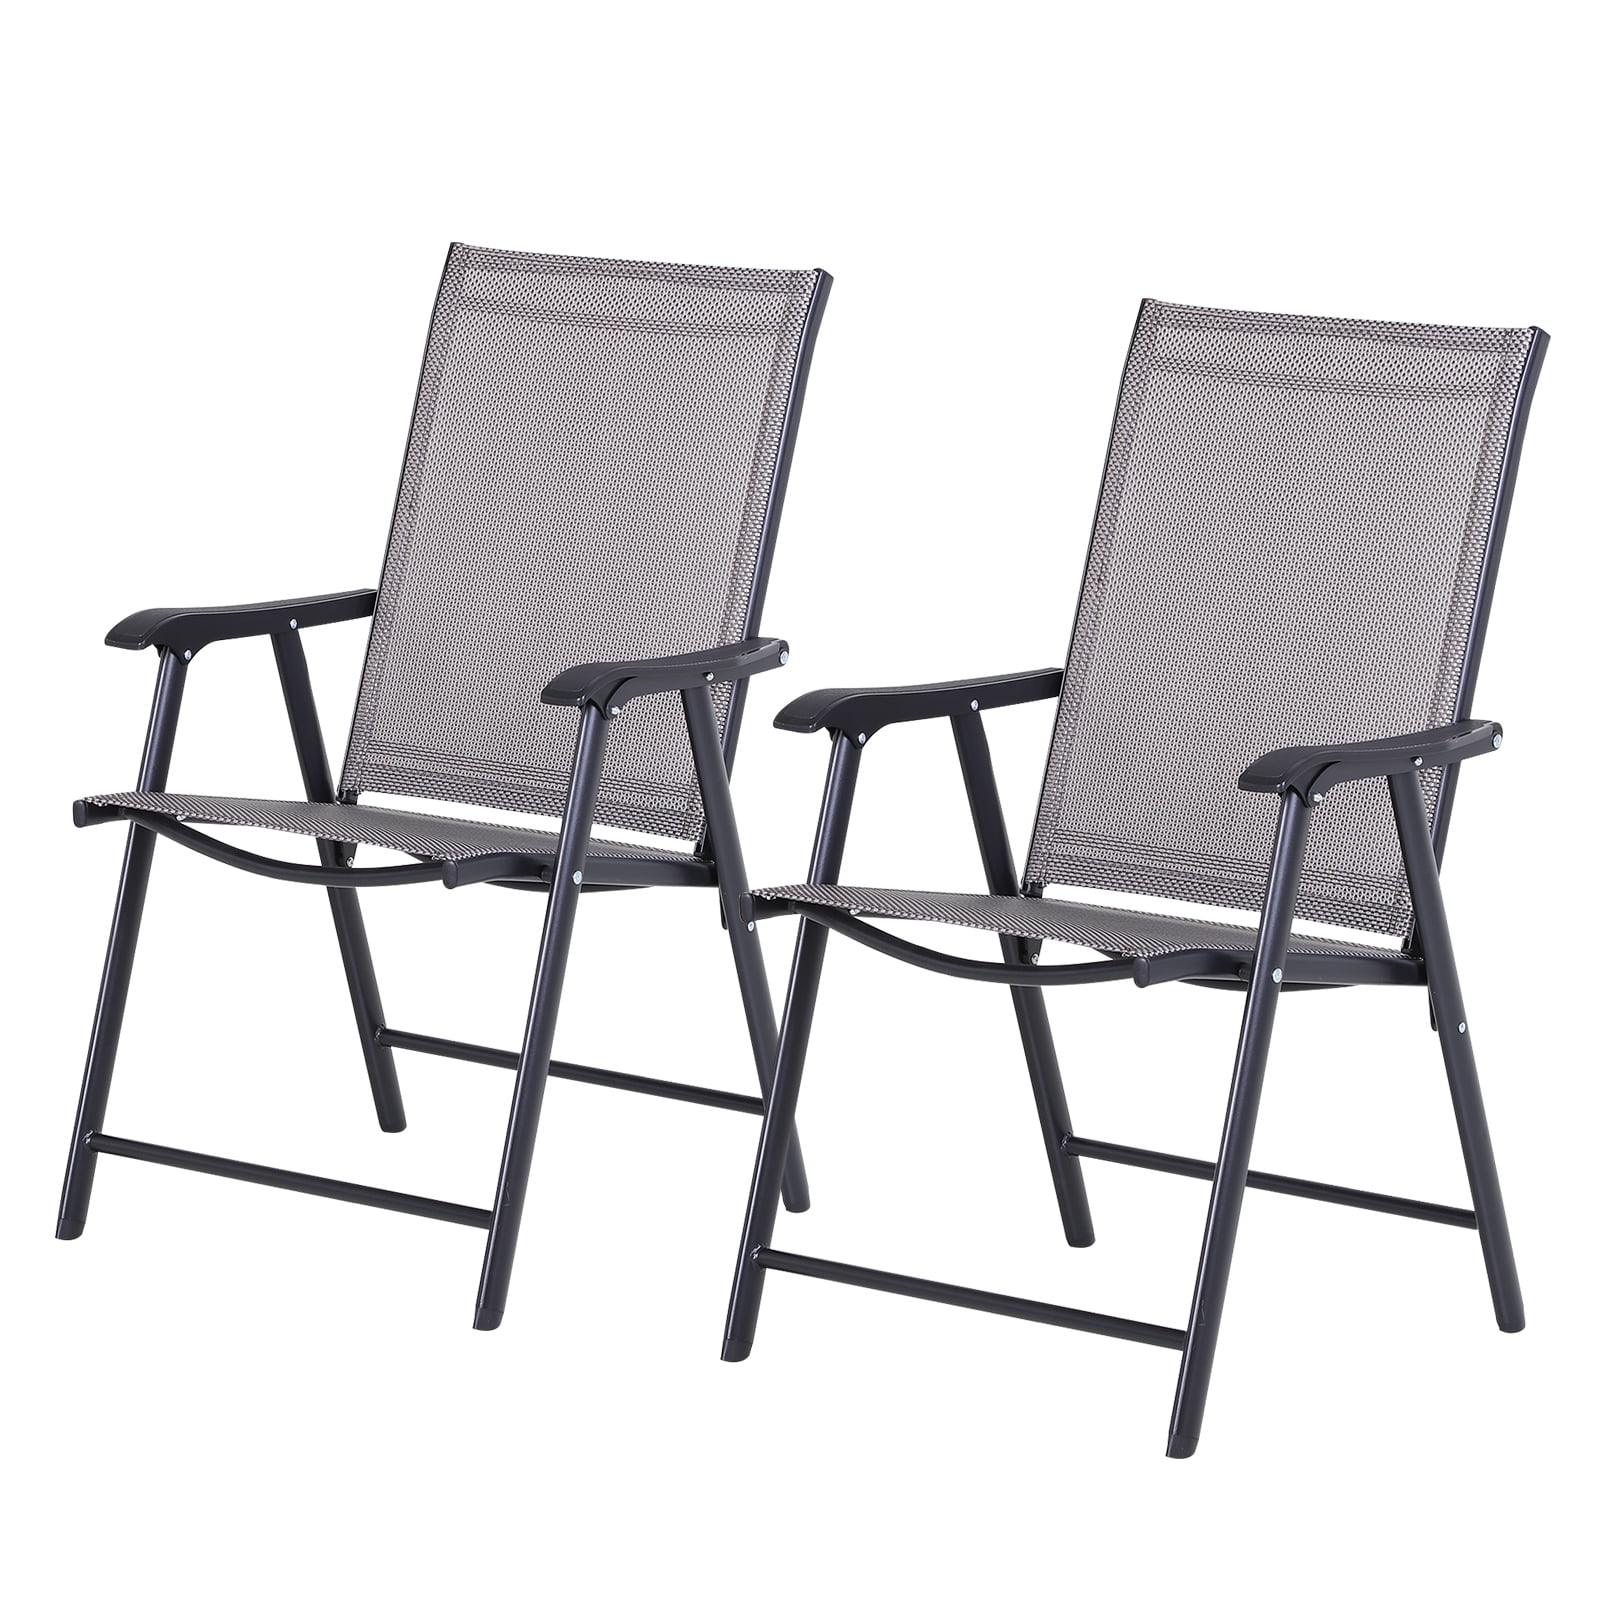 Outdoor Lawn Patio Folding Chairs Home Deck Porch Camping Portable Set of 2 Red 